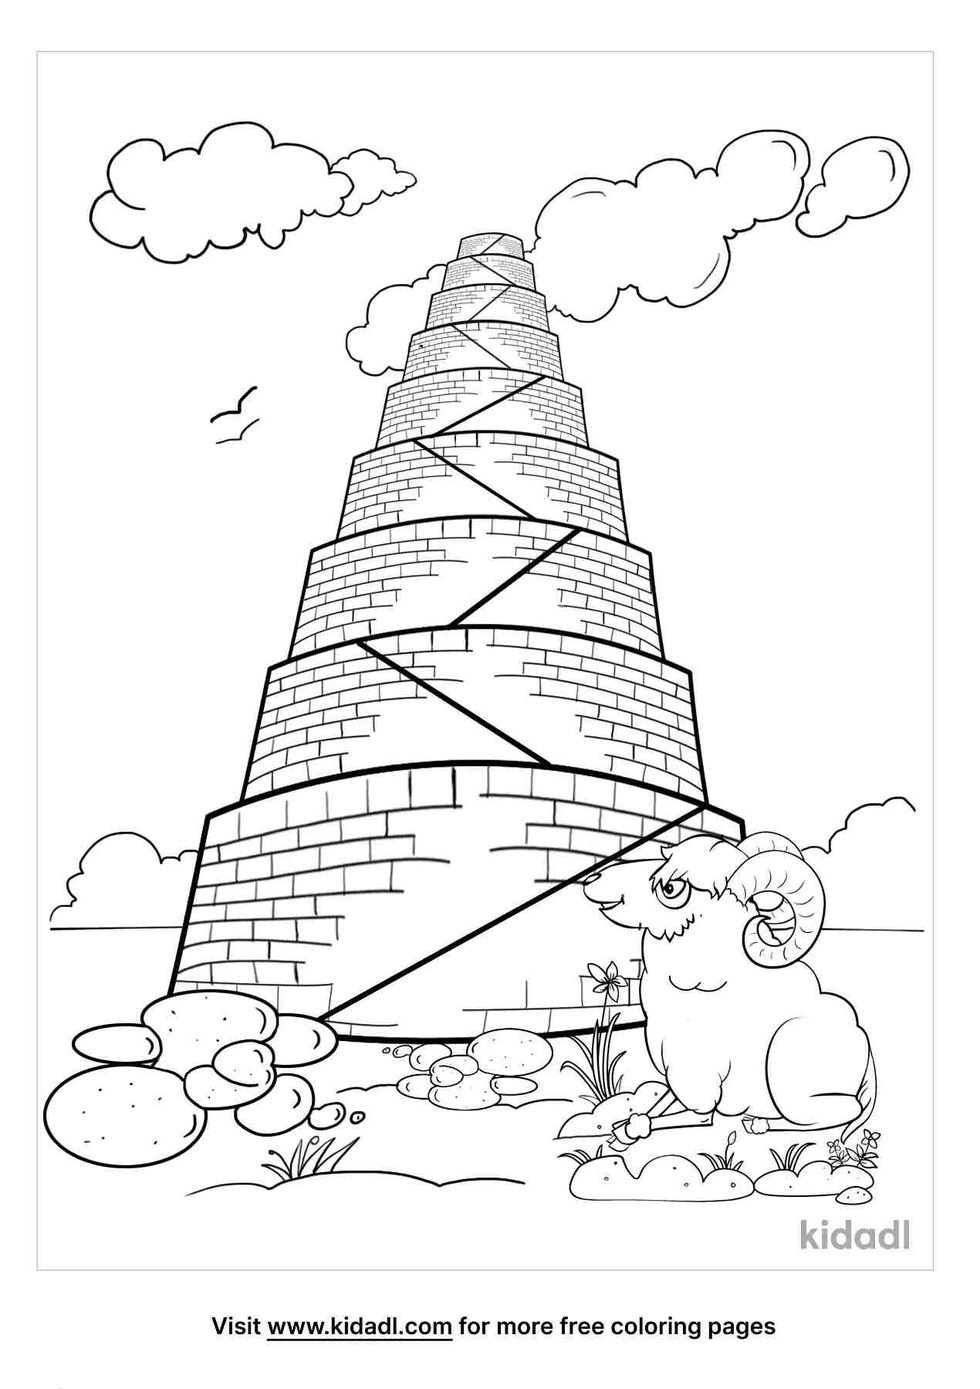 coloring page containing tower of babel